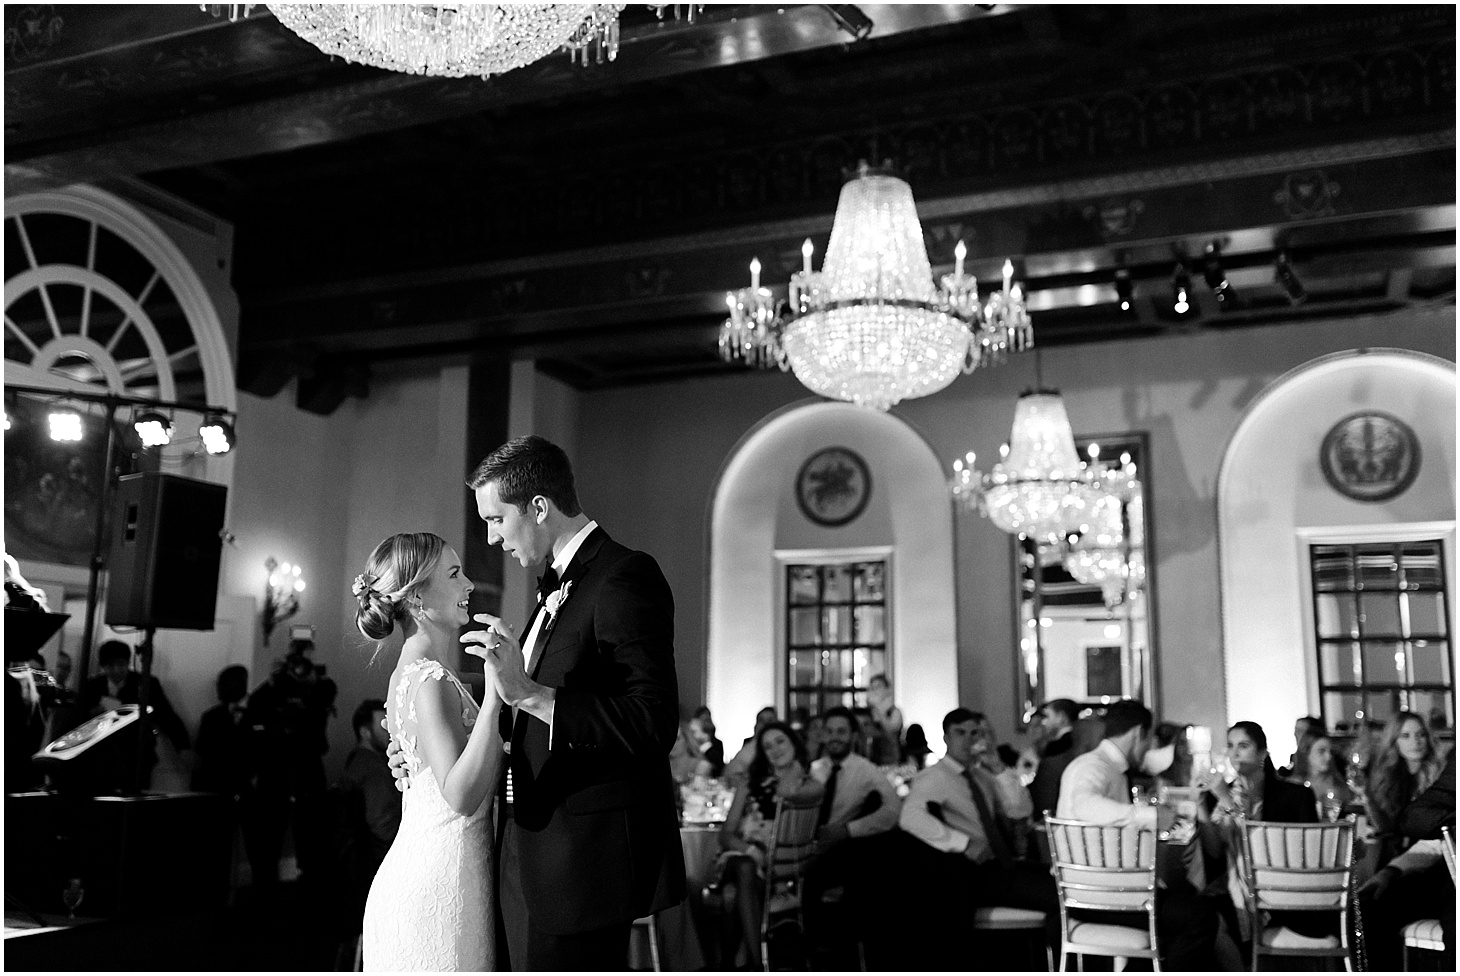 First Dance at the St. Regis Washington, DC Wedding Reception | Southern Black Tie Wedding in Dusty Blue and Ivory | Sarah Bradshaw Photography